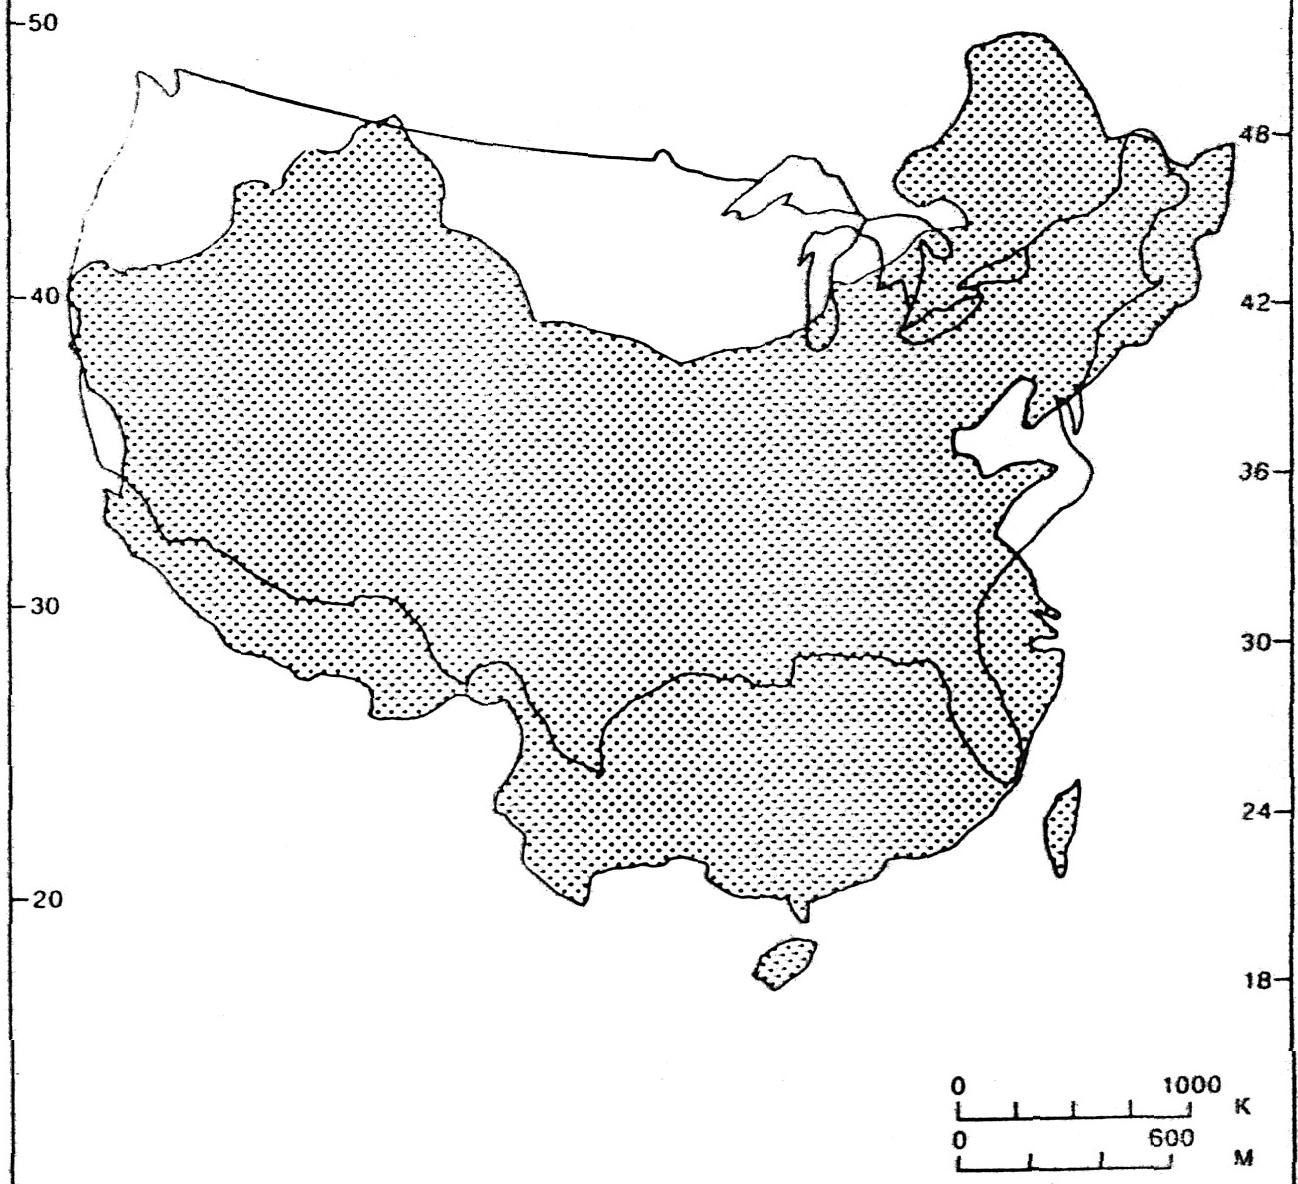 Maps of China and the USA